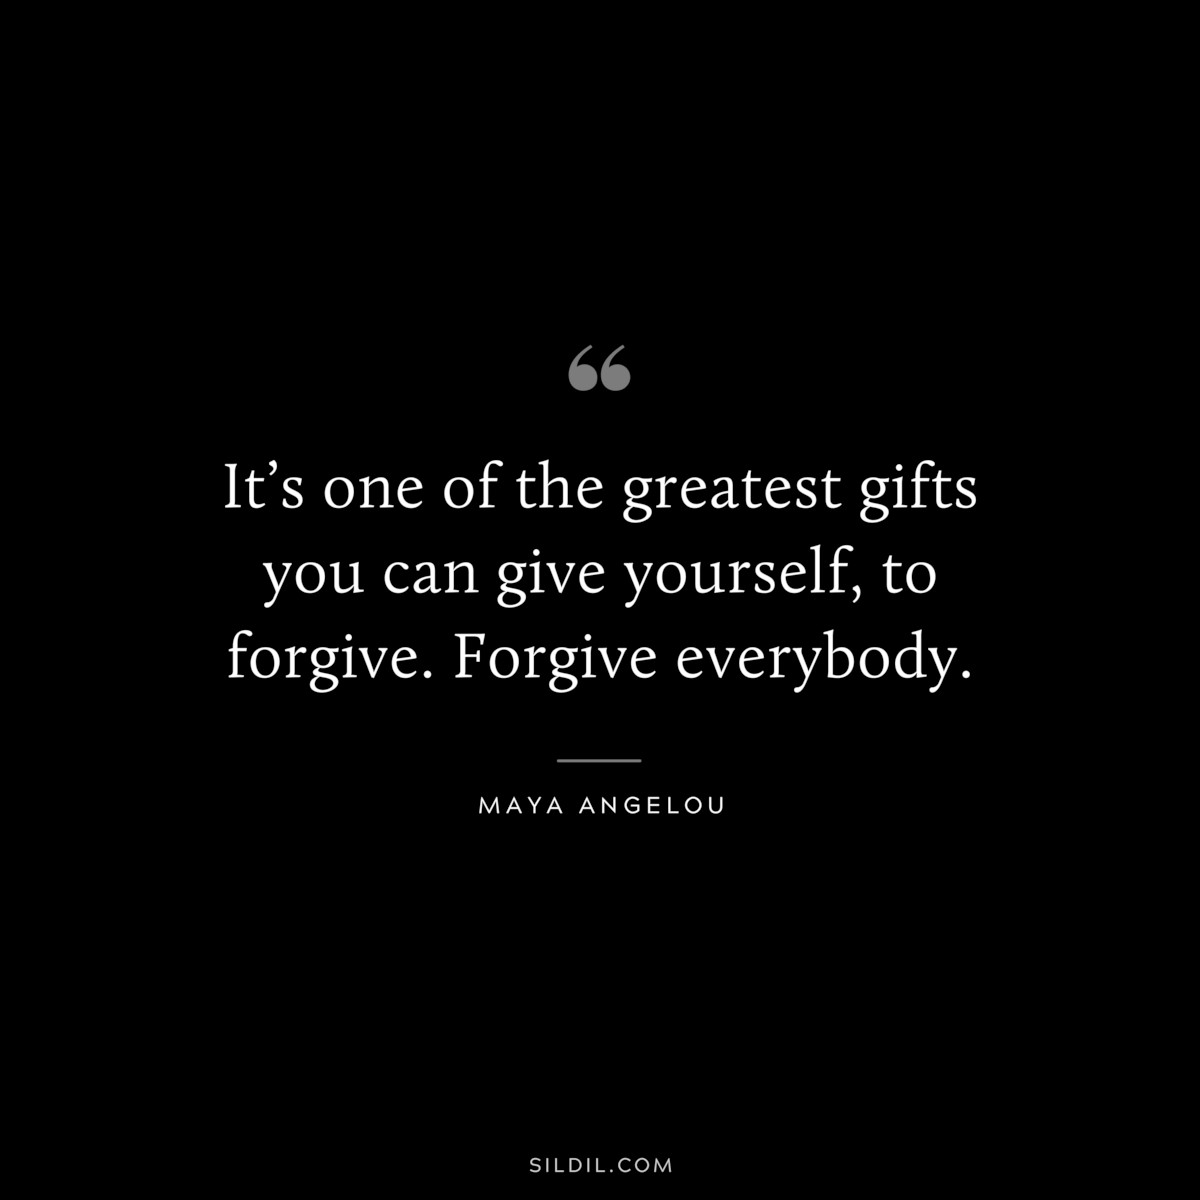 It’s one of the greatest gifts you can give yourself, to forgive. Forgive everybody. ― Maya Angelou